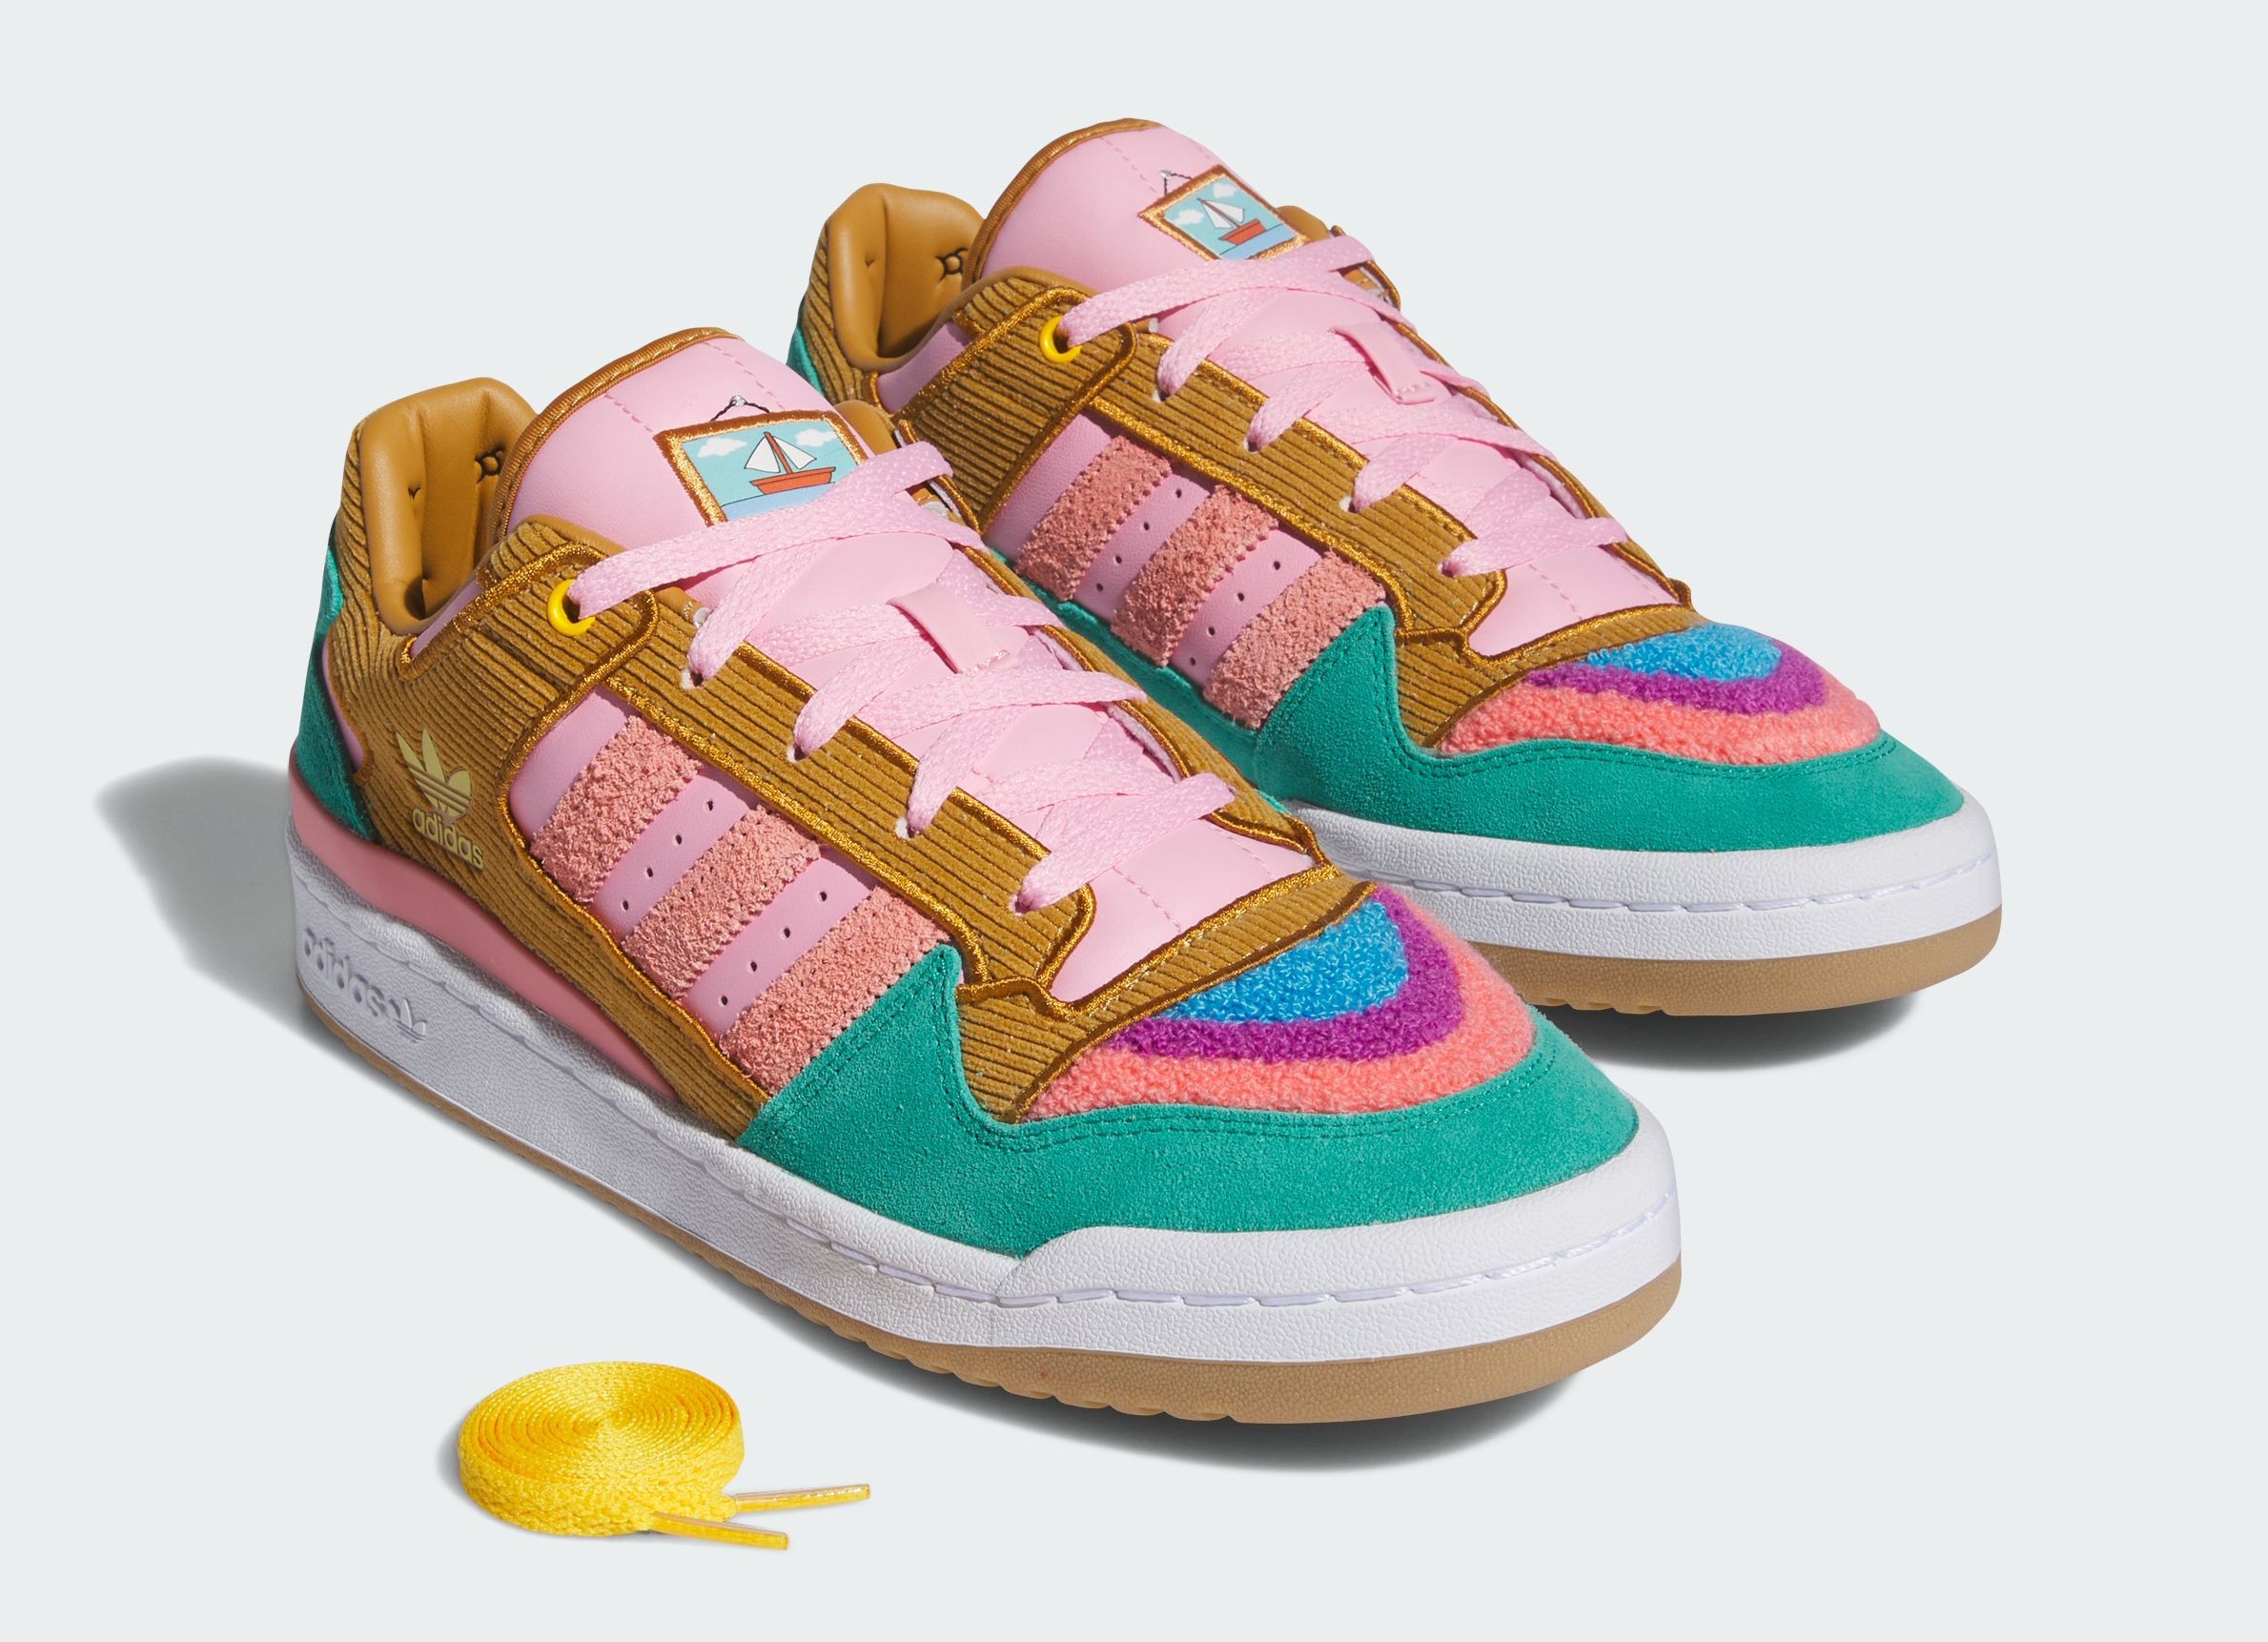 The Simpsons “Living Low Adidas Forum Soon Coming x House Room” of is Heat° 